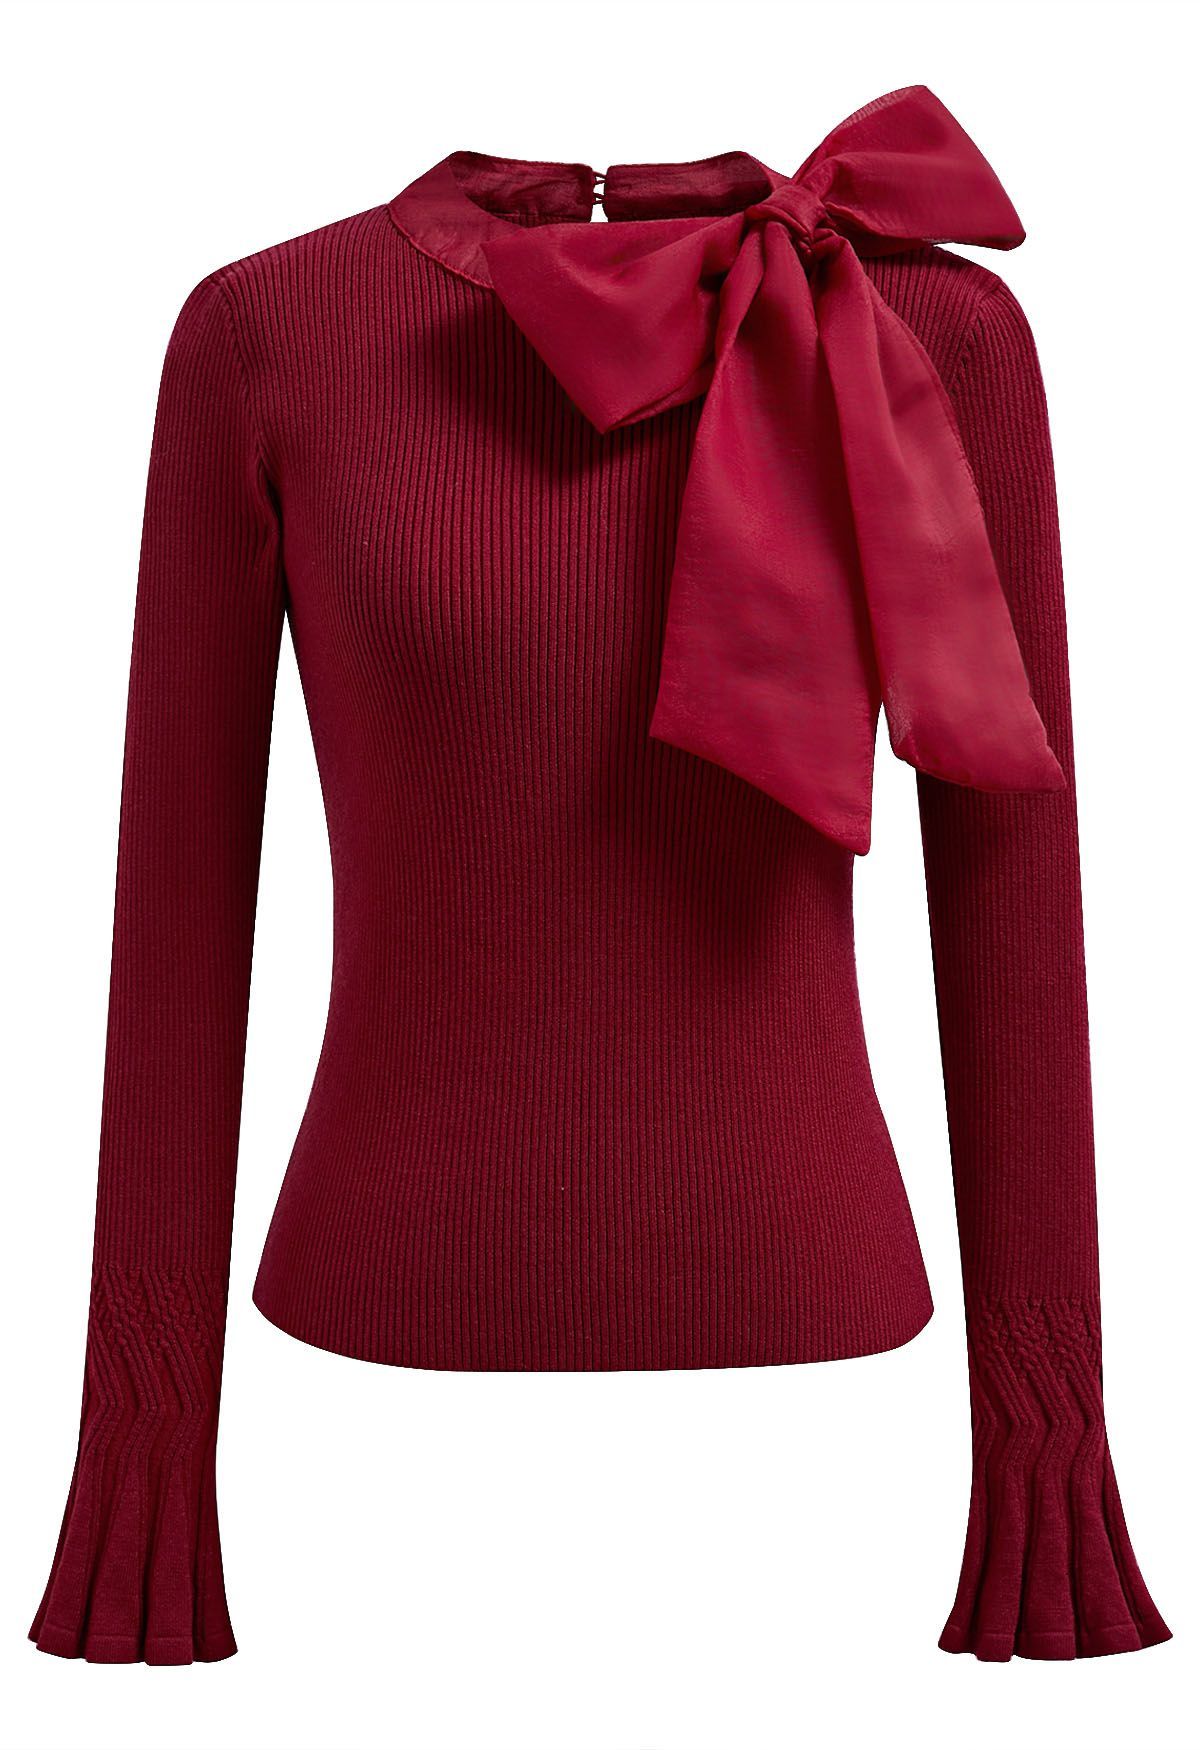 Fancy with Bowknot Knit Top in Burgundy | Chicwish